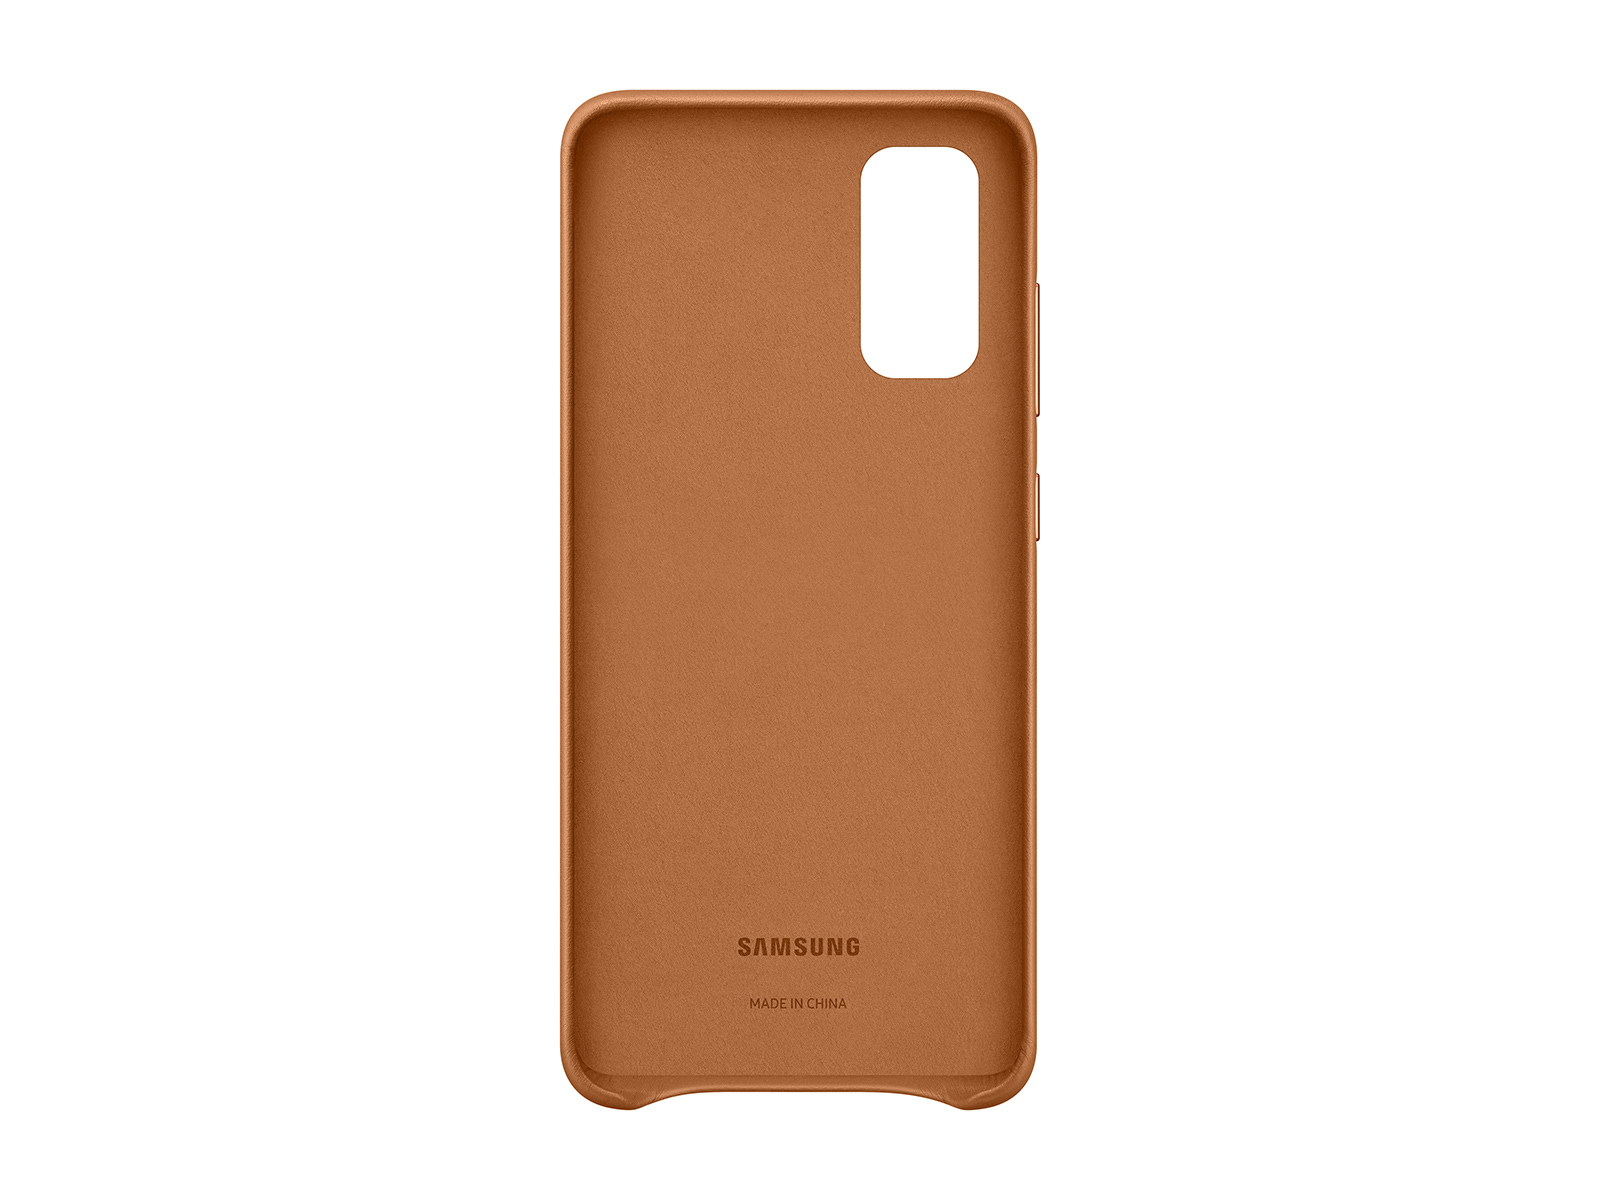 Thumbnail image of Galaxy S20 5G Leather Cover, Brown